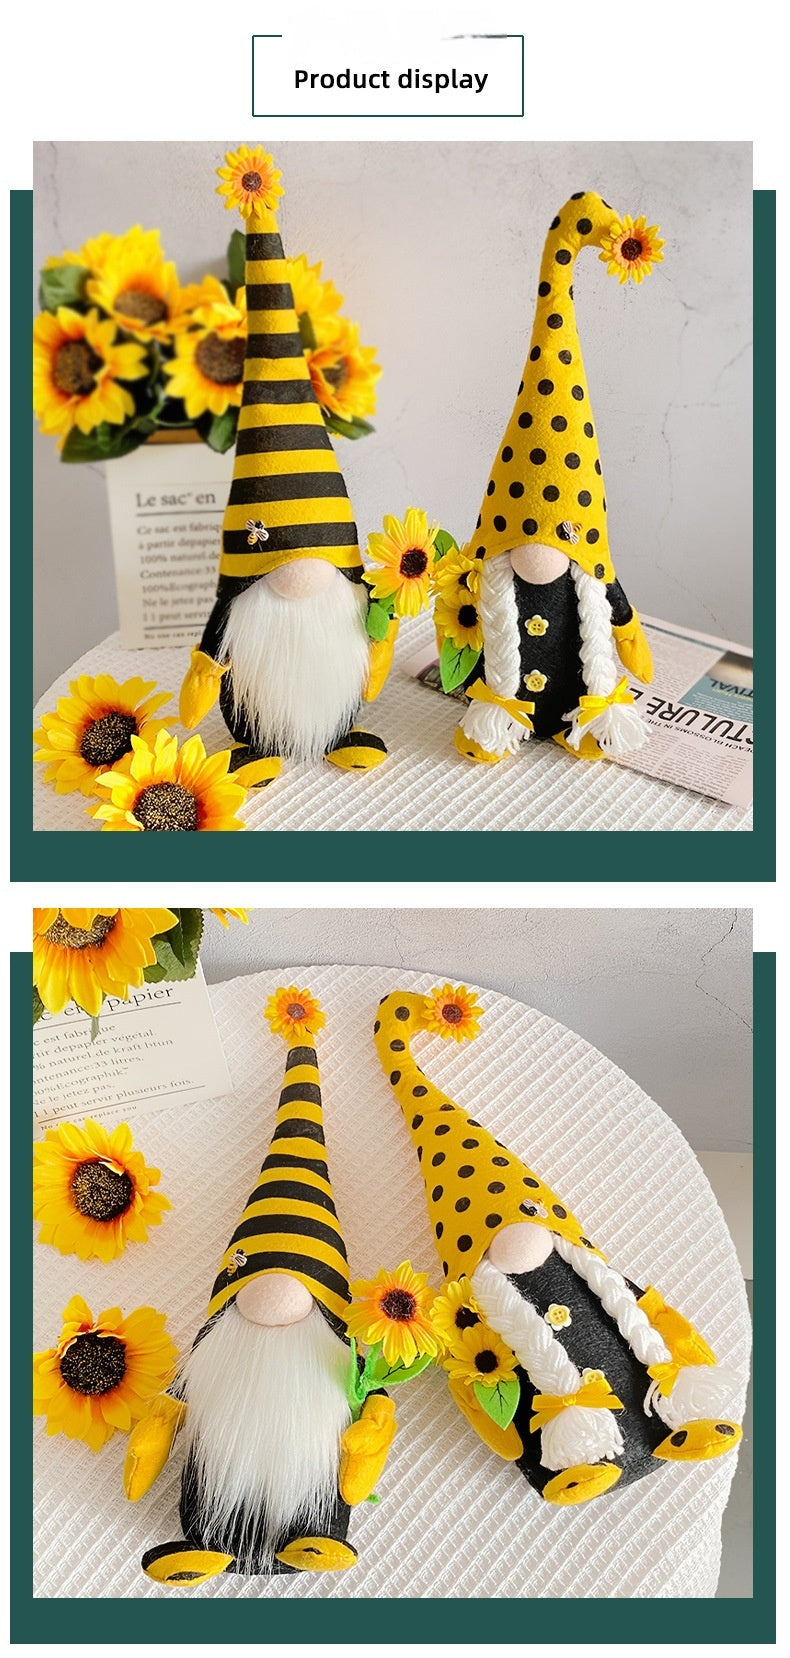 Bee Festival Long Hat Faceless Doll Cute Bee Sunflower Doll Ornaments, Bee gnomes, Beekeeper gnomes, Honey gnomes, Bumblebee gnomes, Beehive gnomes, Pollen gnomes, Garden gnomes, Spring gnomes, Flower gnomes, Nature gnomes, Decorative gnomes, Rustic gnomes, Festive gnomes, Yellow and black gnomes, Bee-friendly gnomes, Happy bees gnomes,